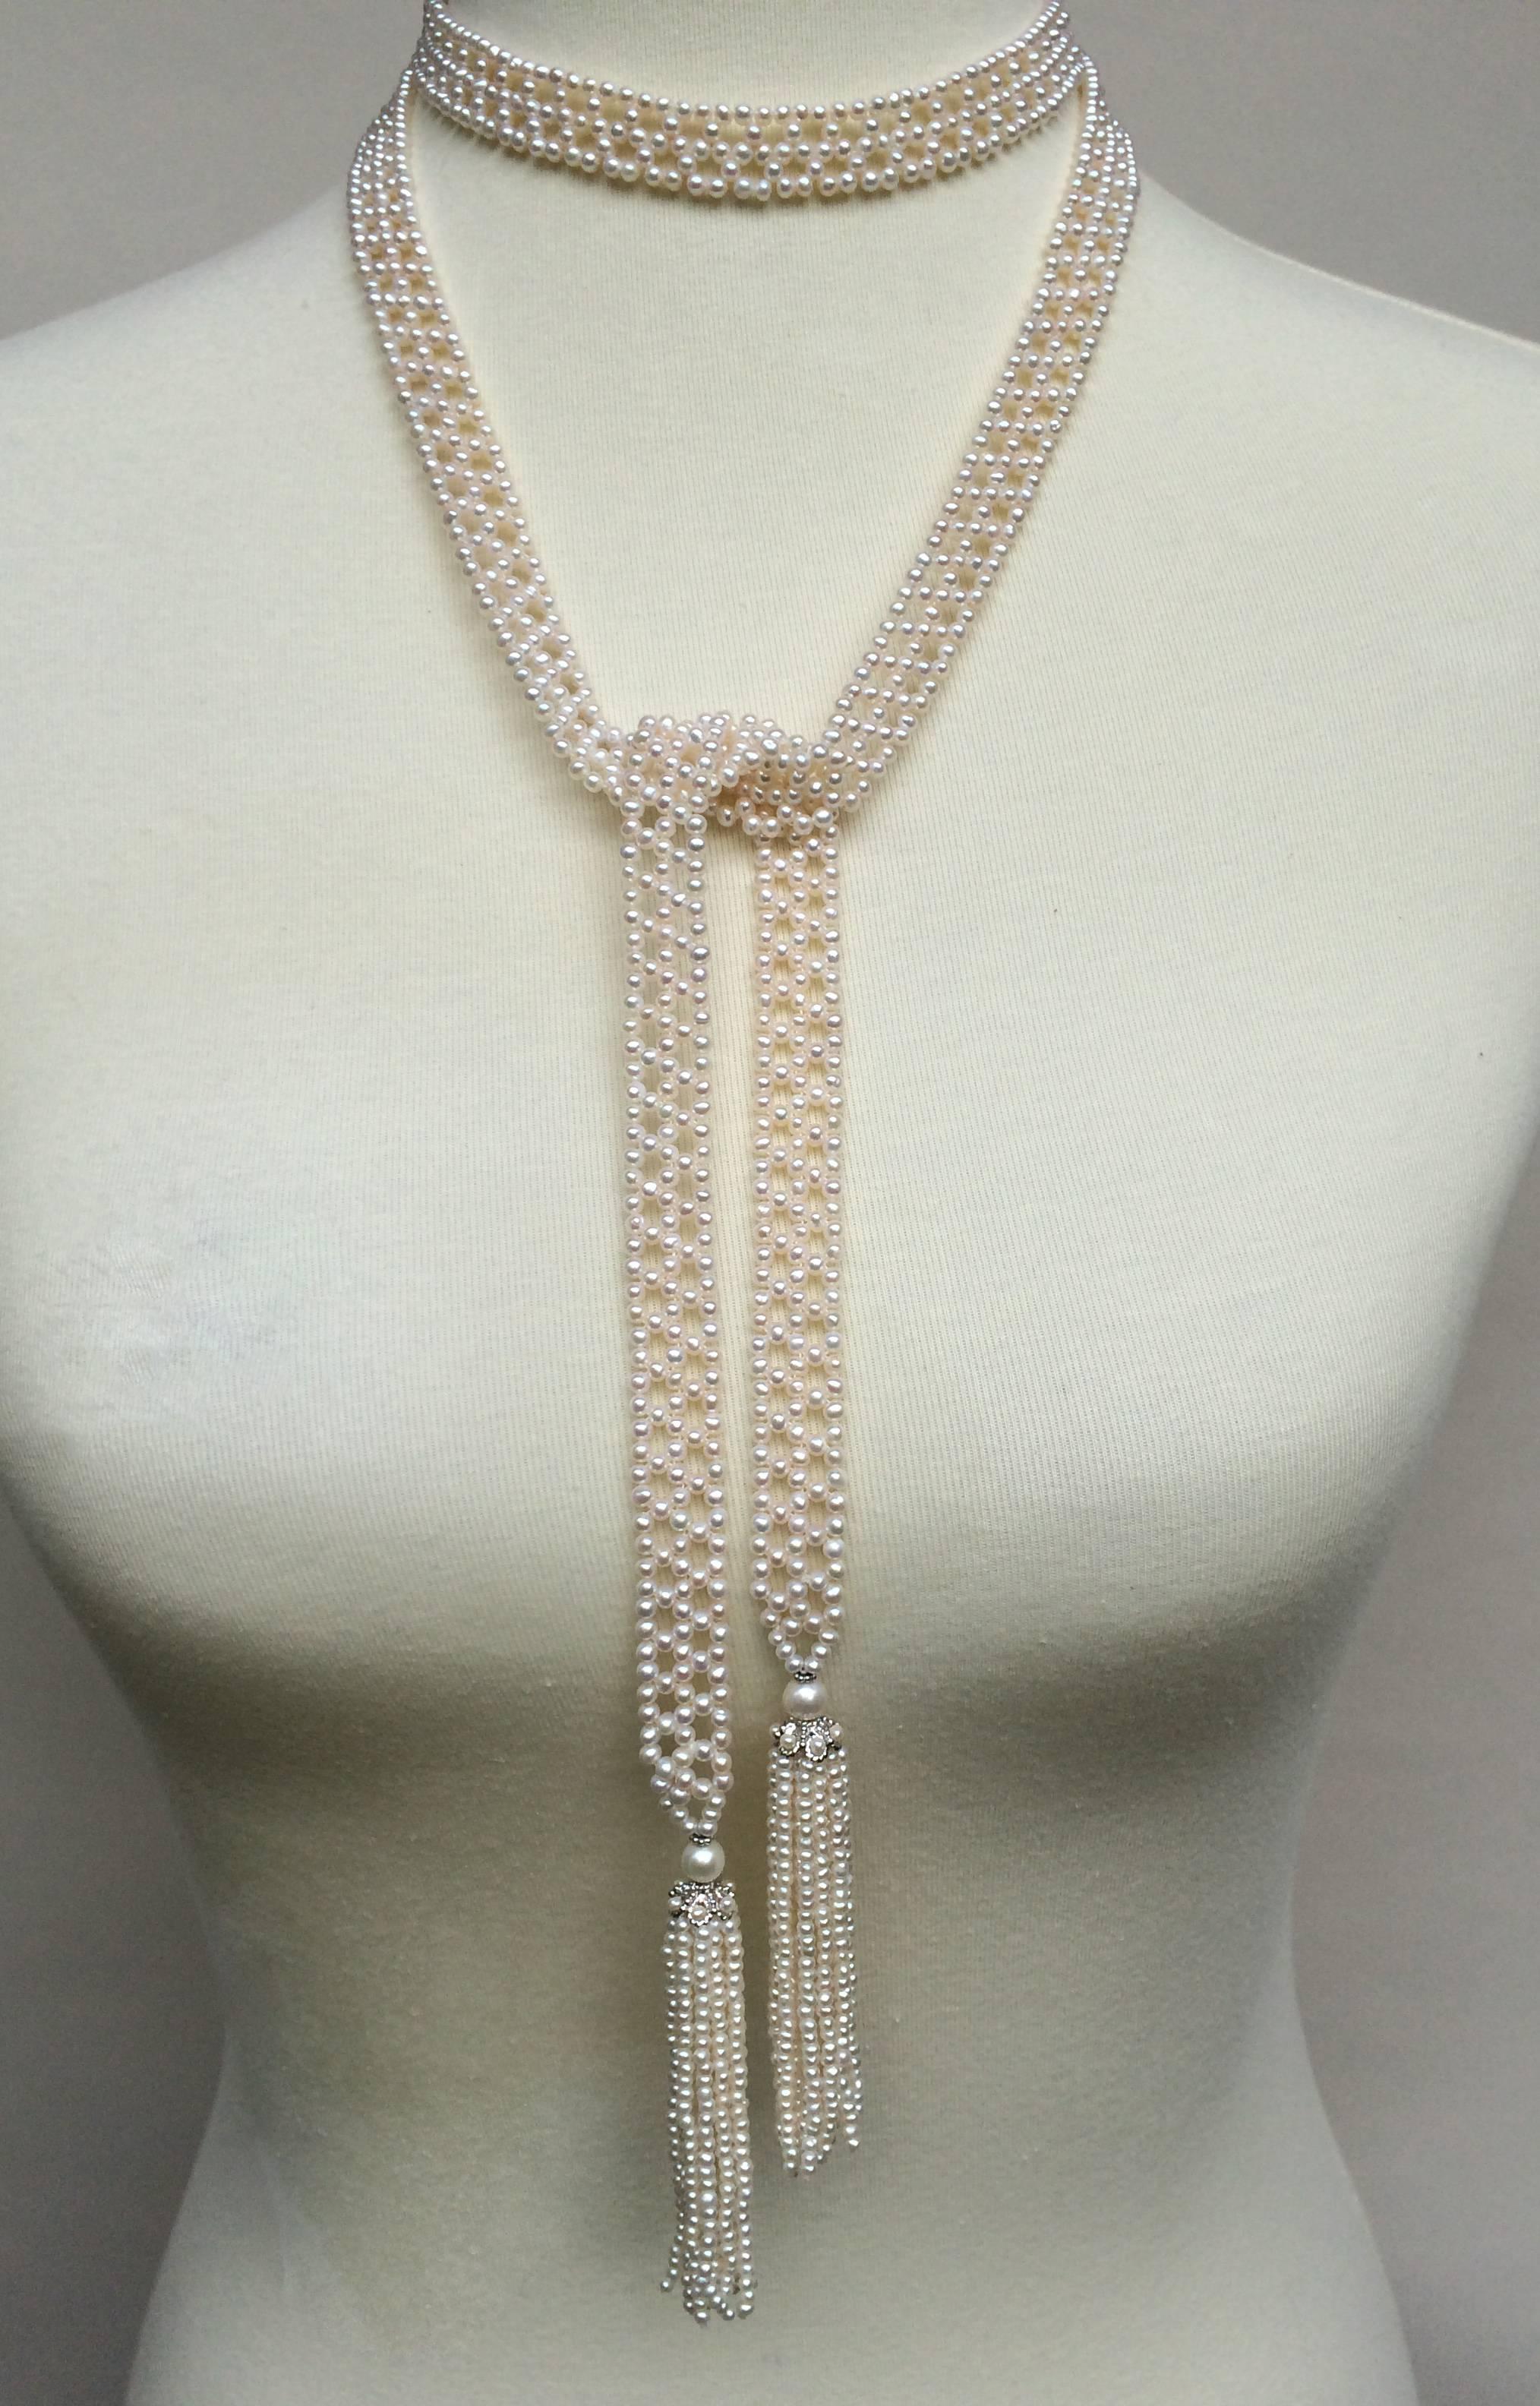 Artist Marina J Woven Pearl Sautoir with 14 K White Gold Cup and Pearl Tassels & Brooch